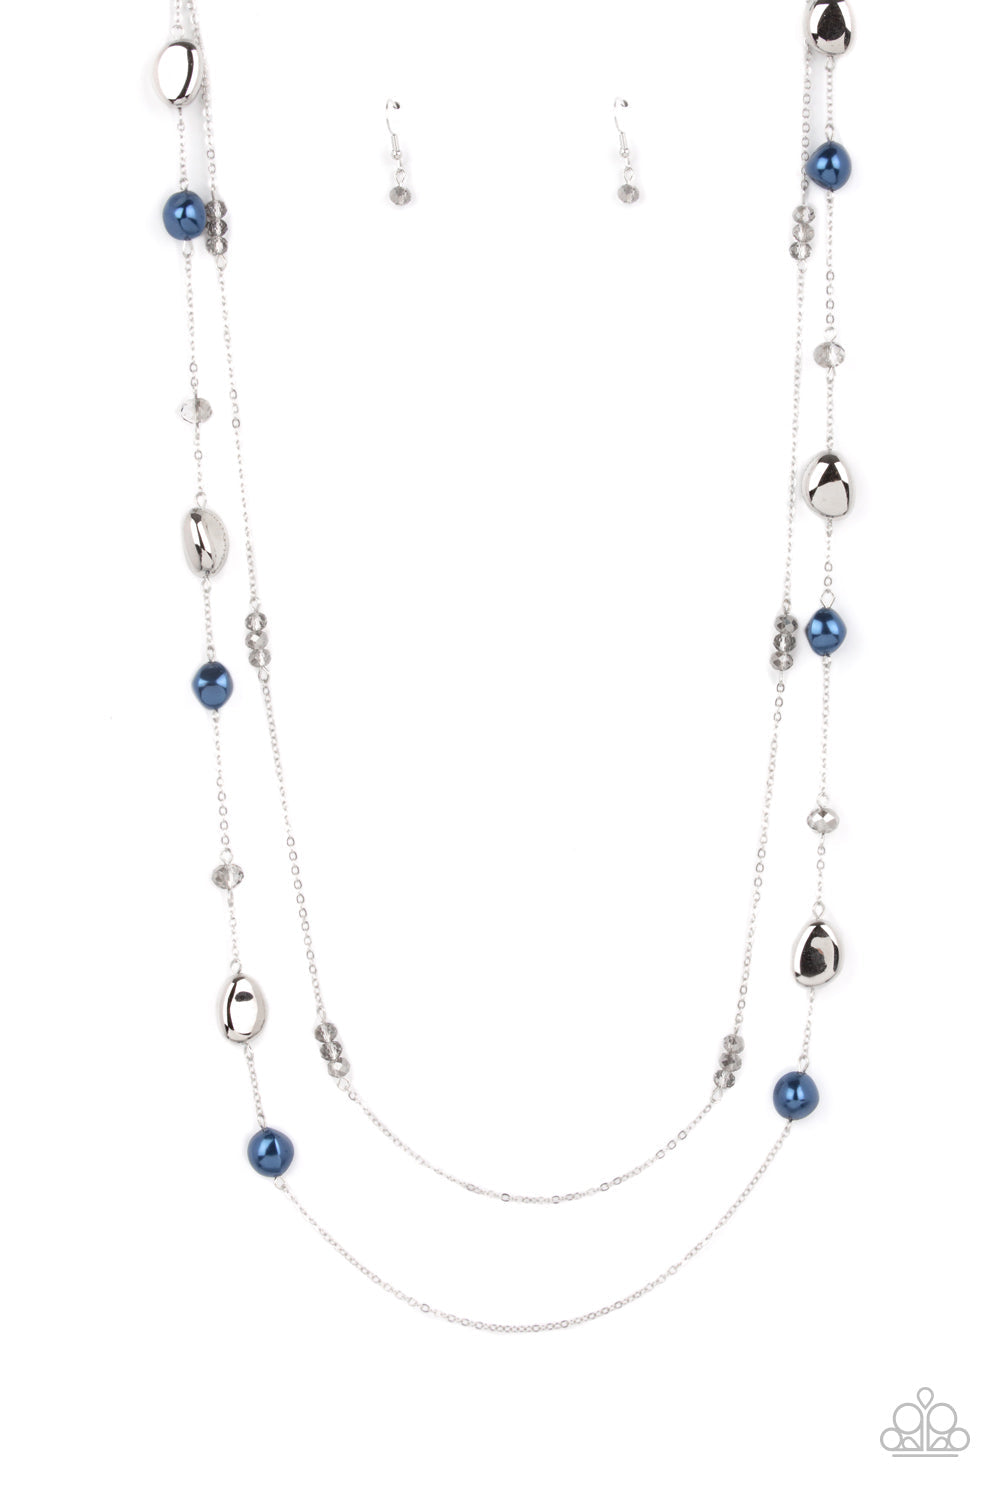 Gala Goals - Blue and Silver Necklace - Paparazzi Accessories - Dainty silver chain adorned in trios of hematite flecked crystal-like beads layers with a chain dotted with matching crystal-like accents and imperfect silver and pearly blue beads across the chest for a refined flair. Features an adjustable clasp closure.